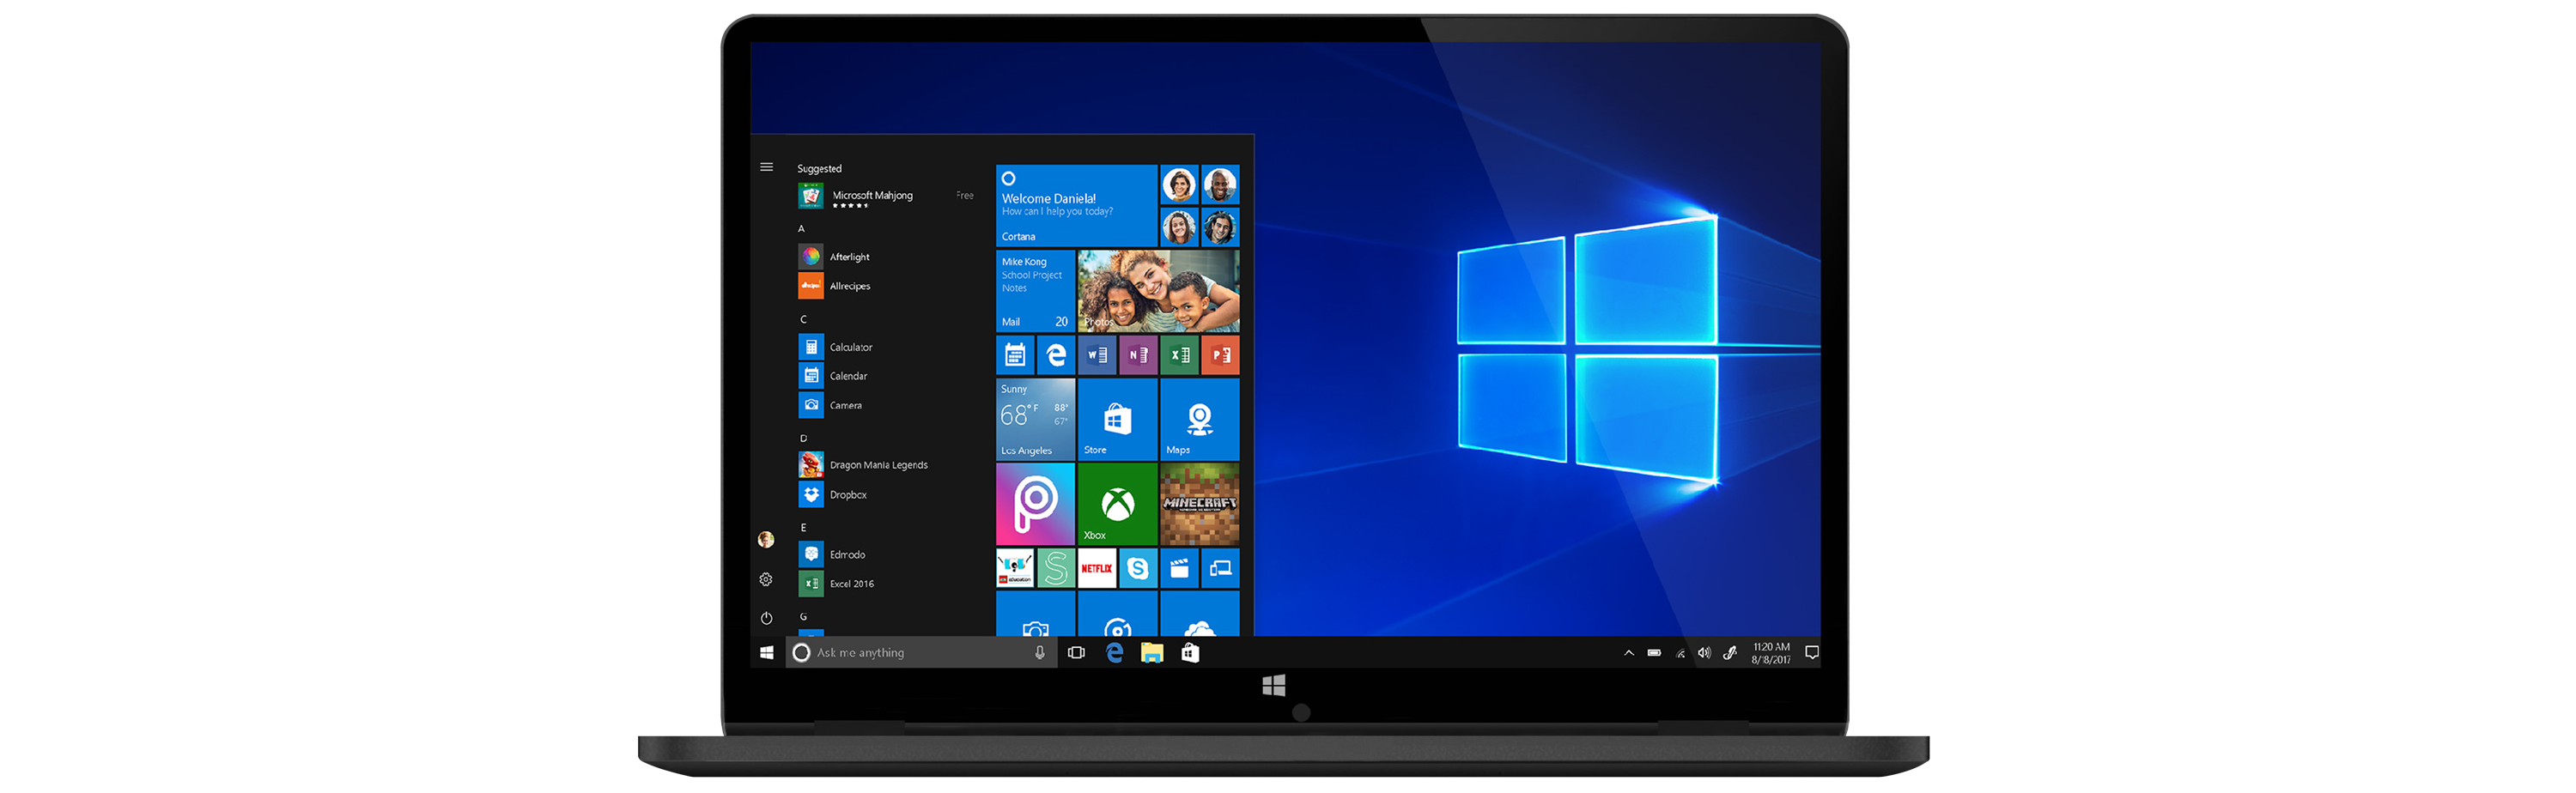 This is an image of the CLT1164 Laptop with the Windows 10 S interface.